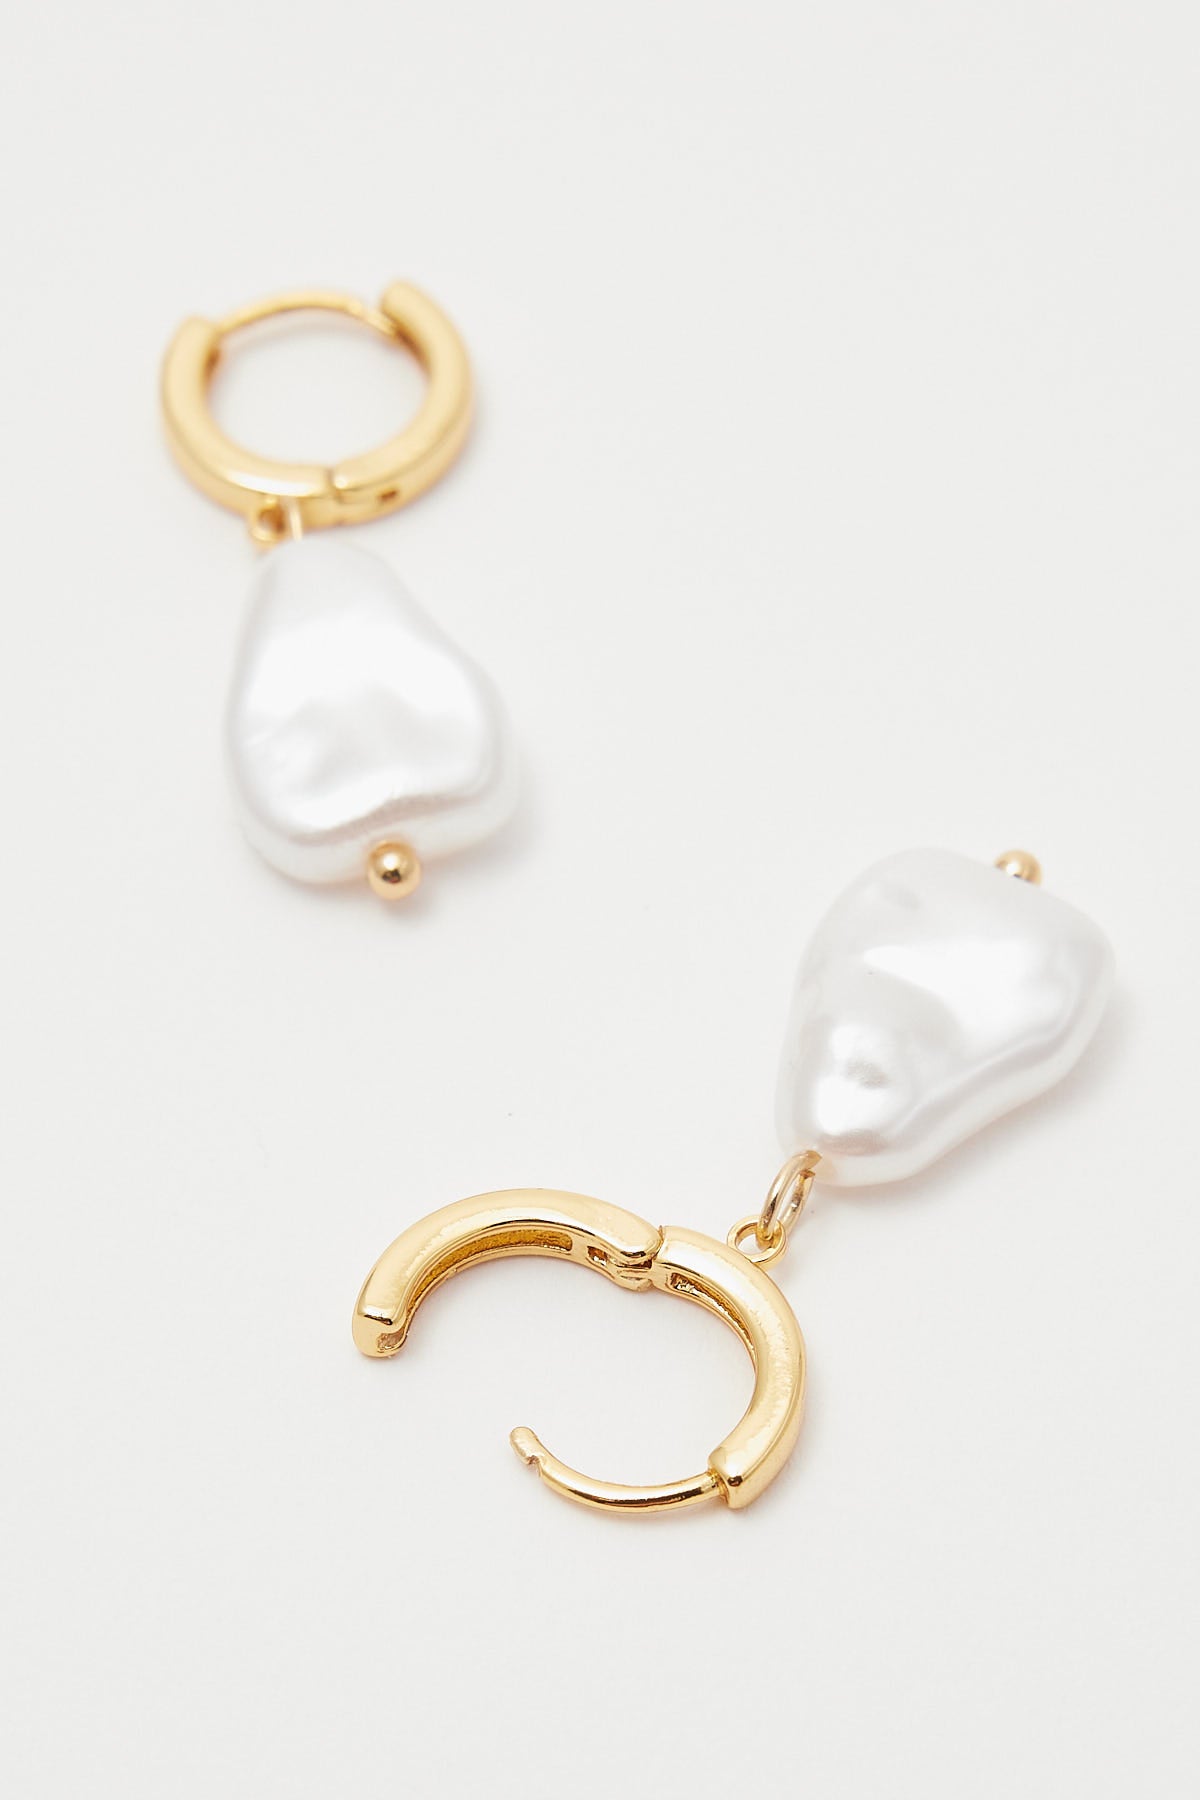 Perfect Stranger Bonnie Pearl Drop Earrings 18K Gold Plated